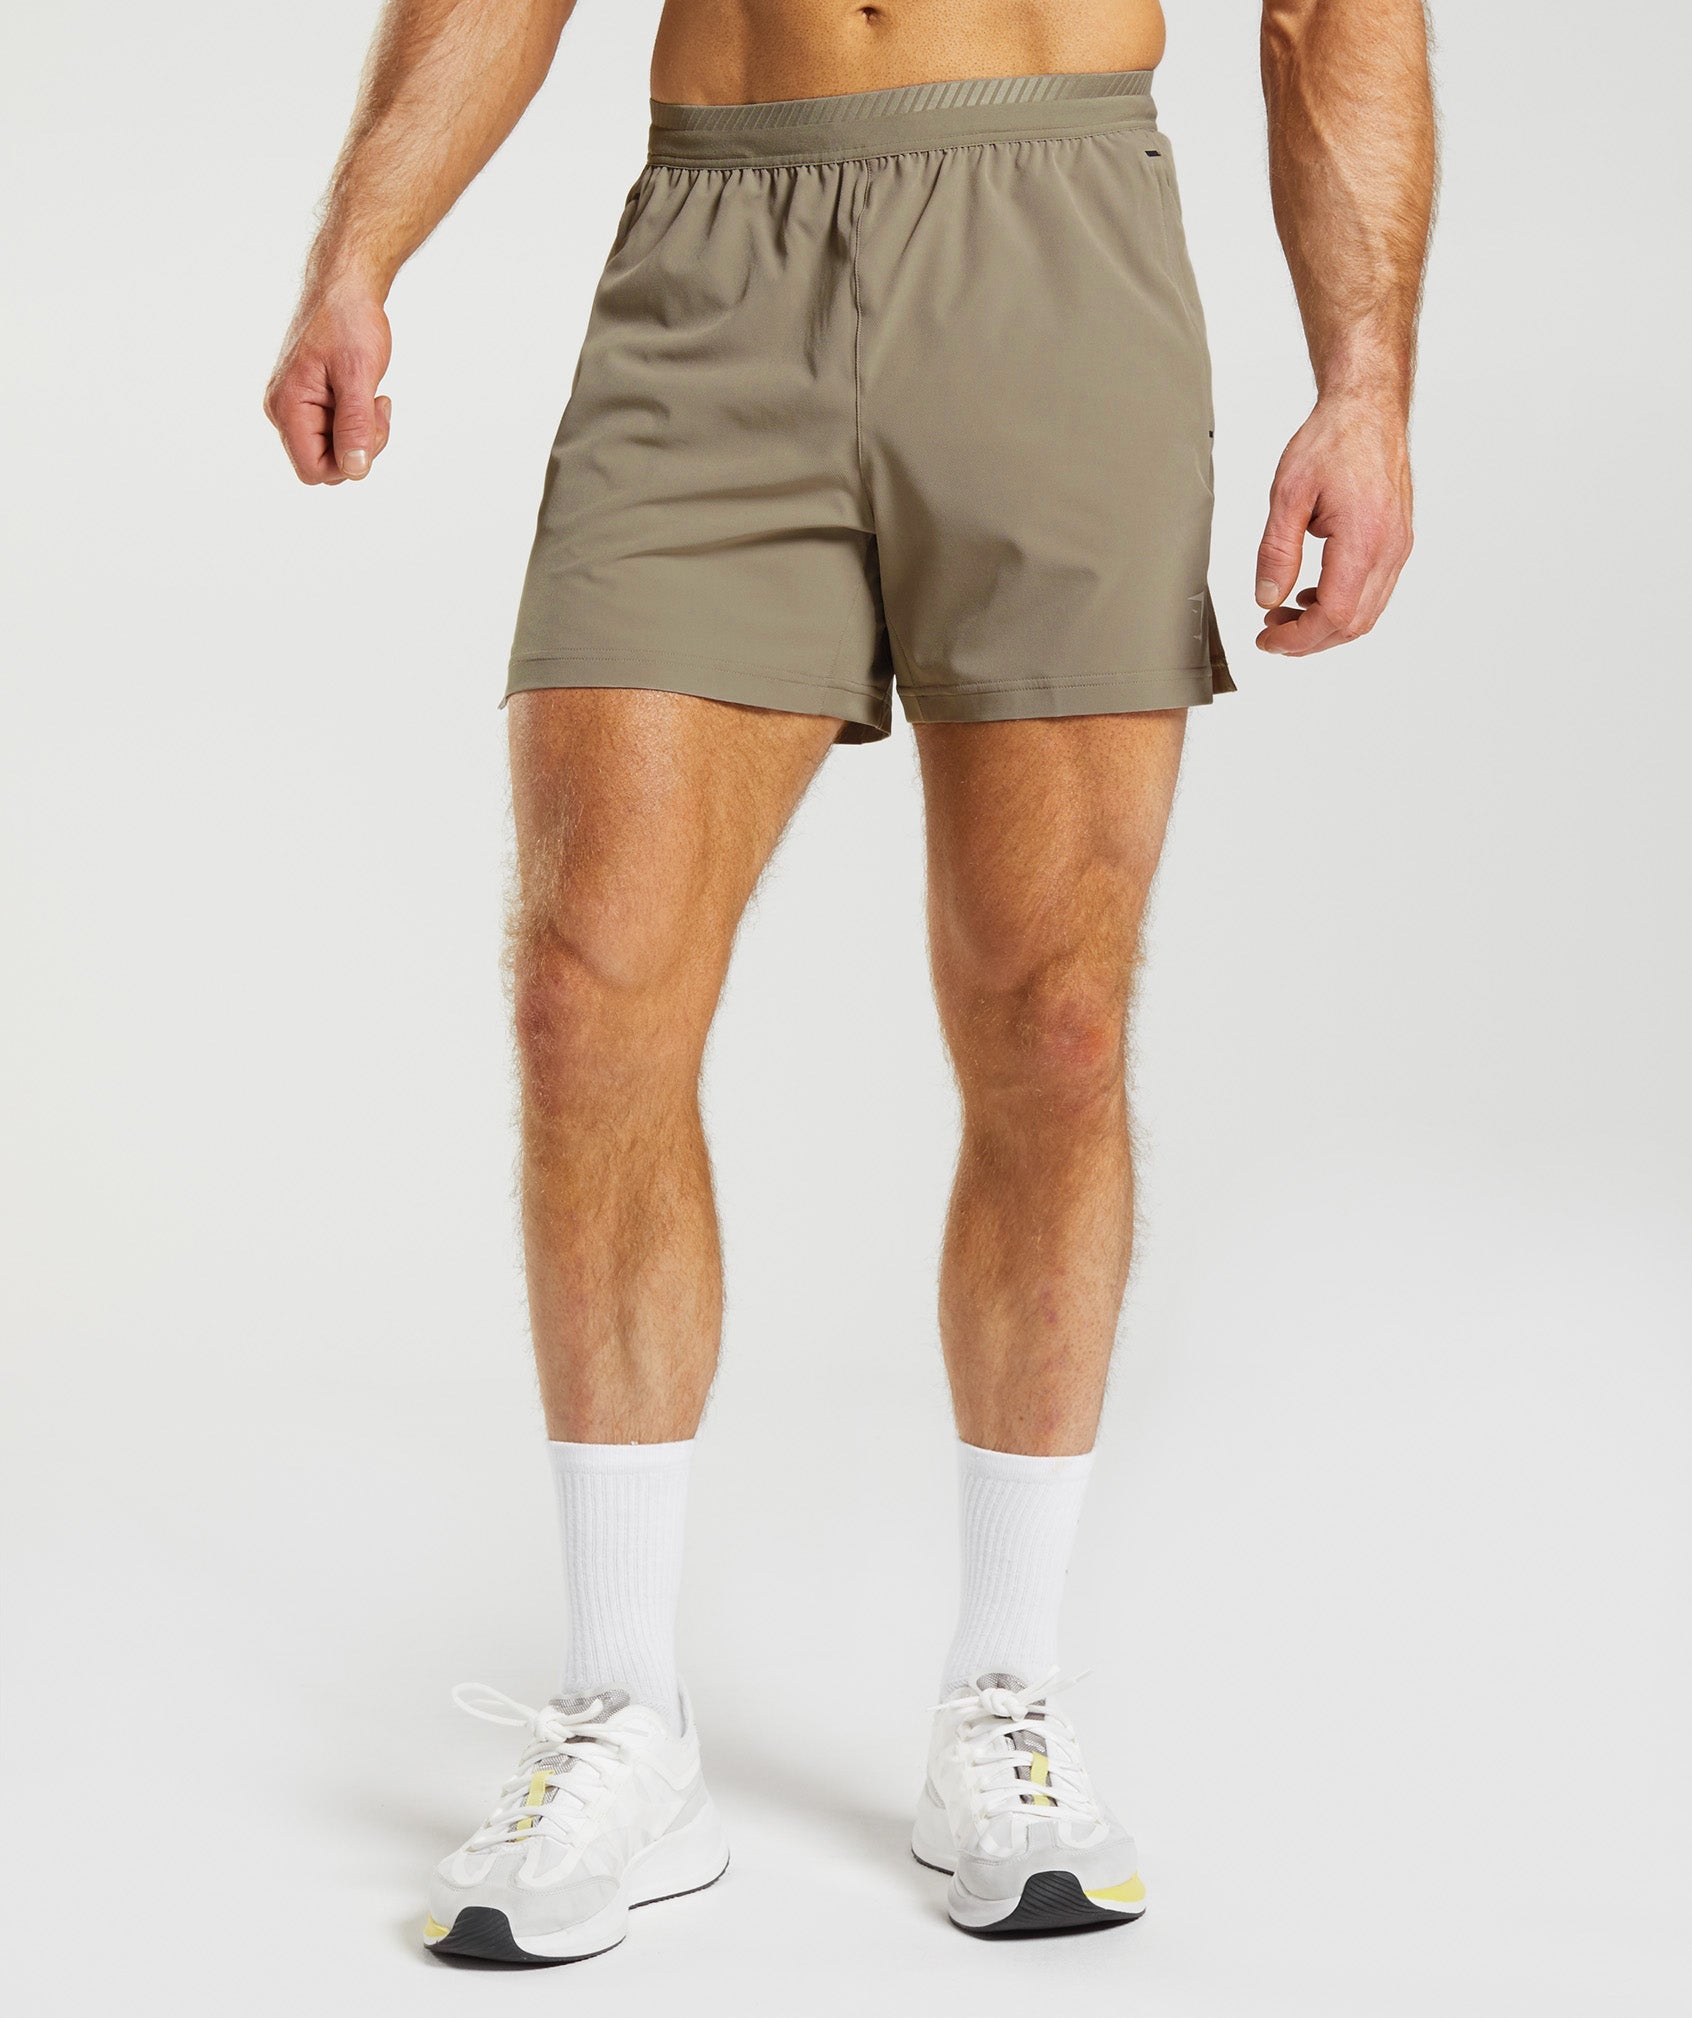 Apex 5" Hybrid Shorts in Earthy Brown - view 1